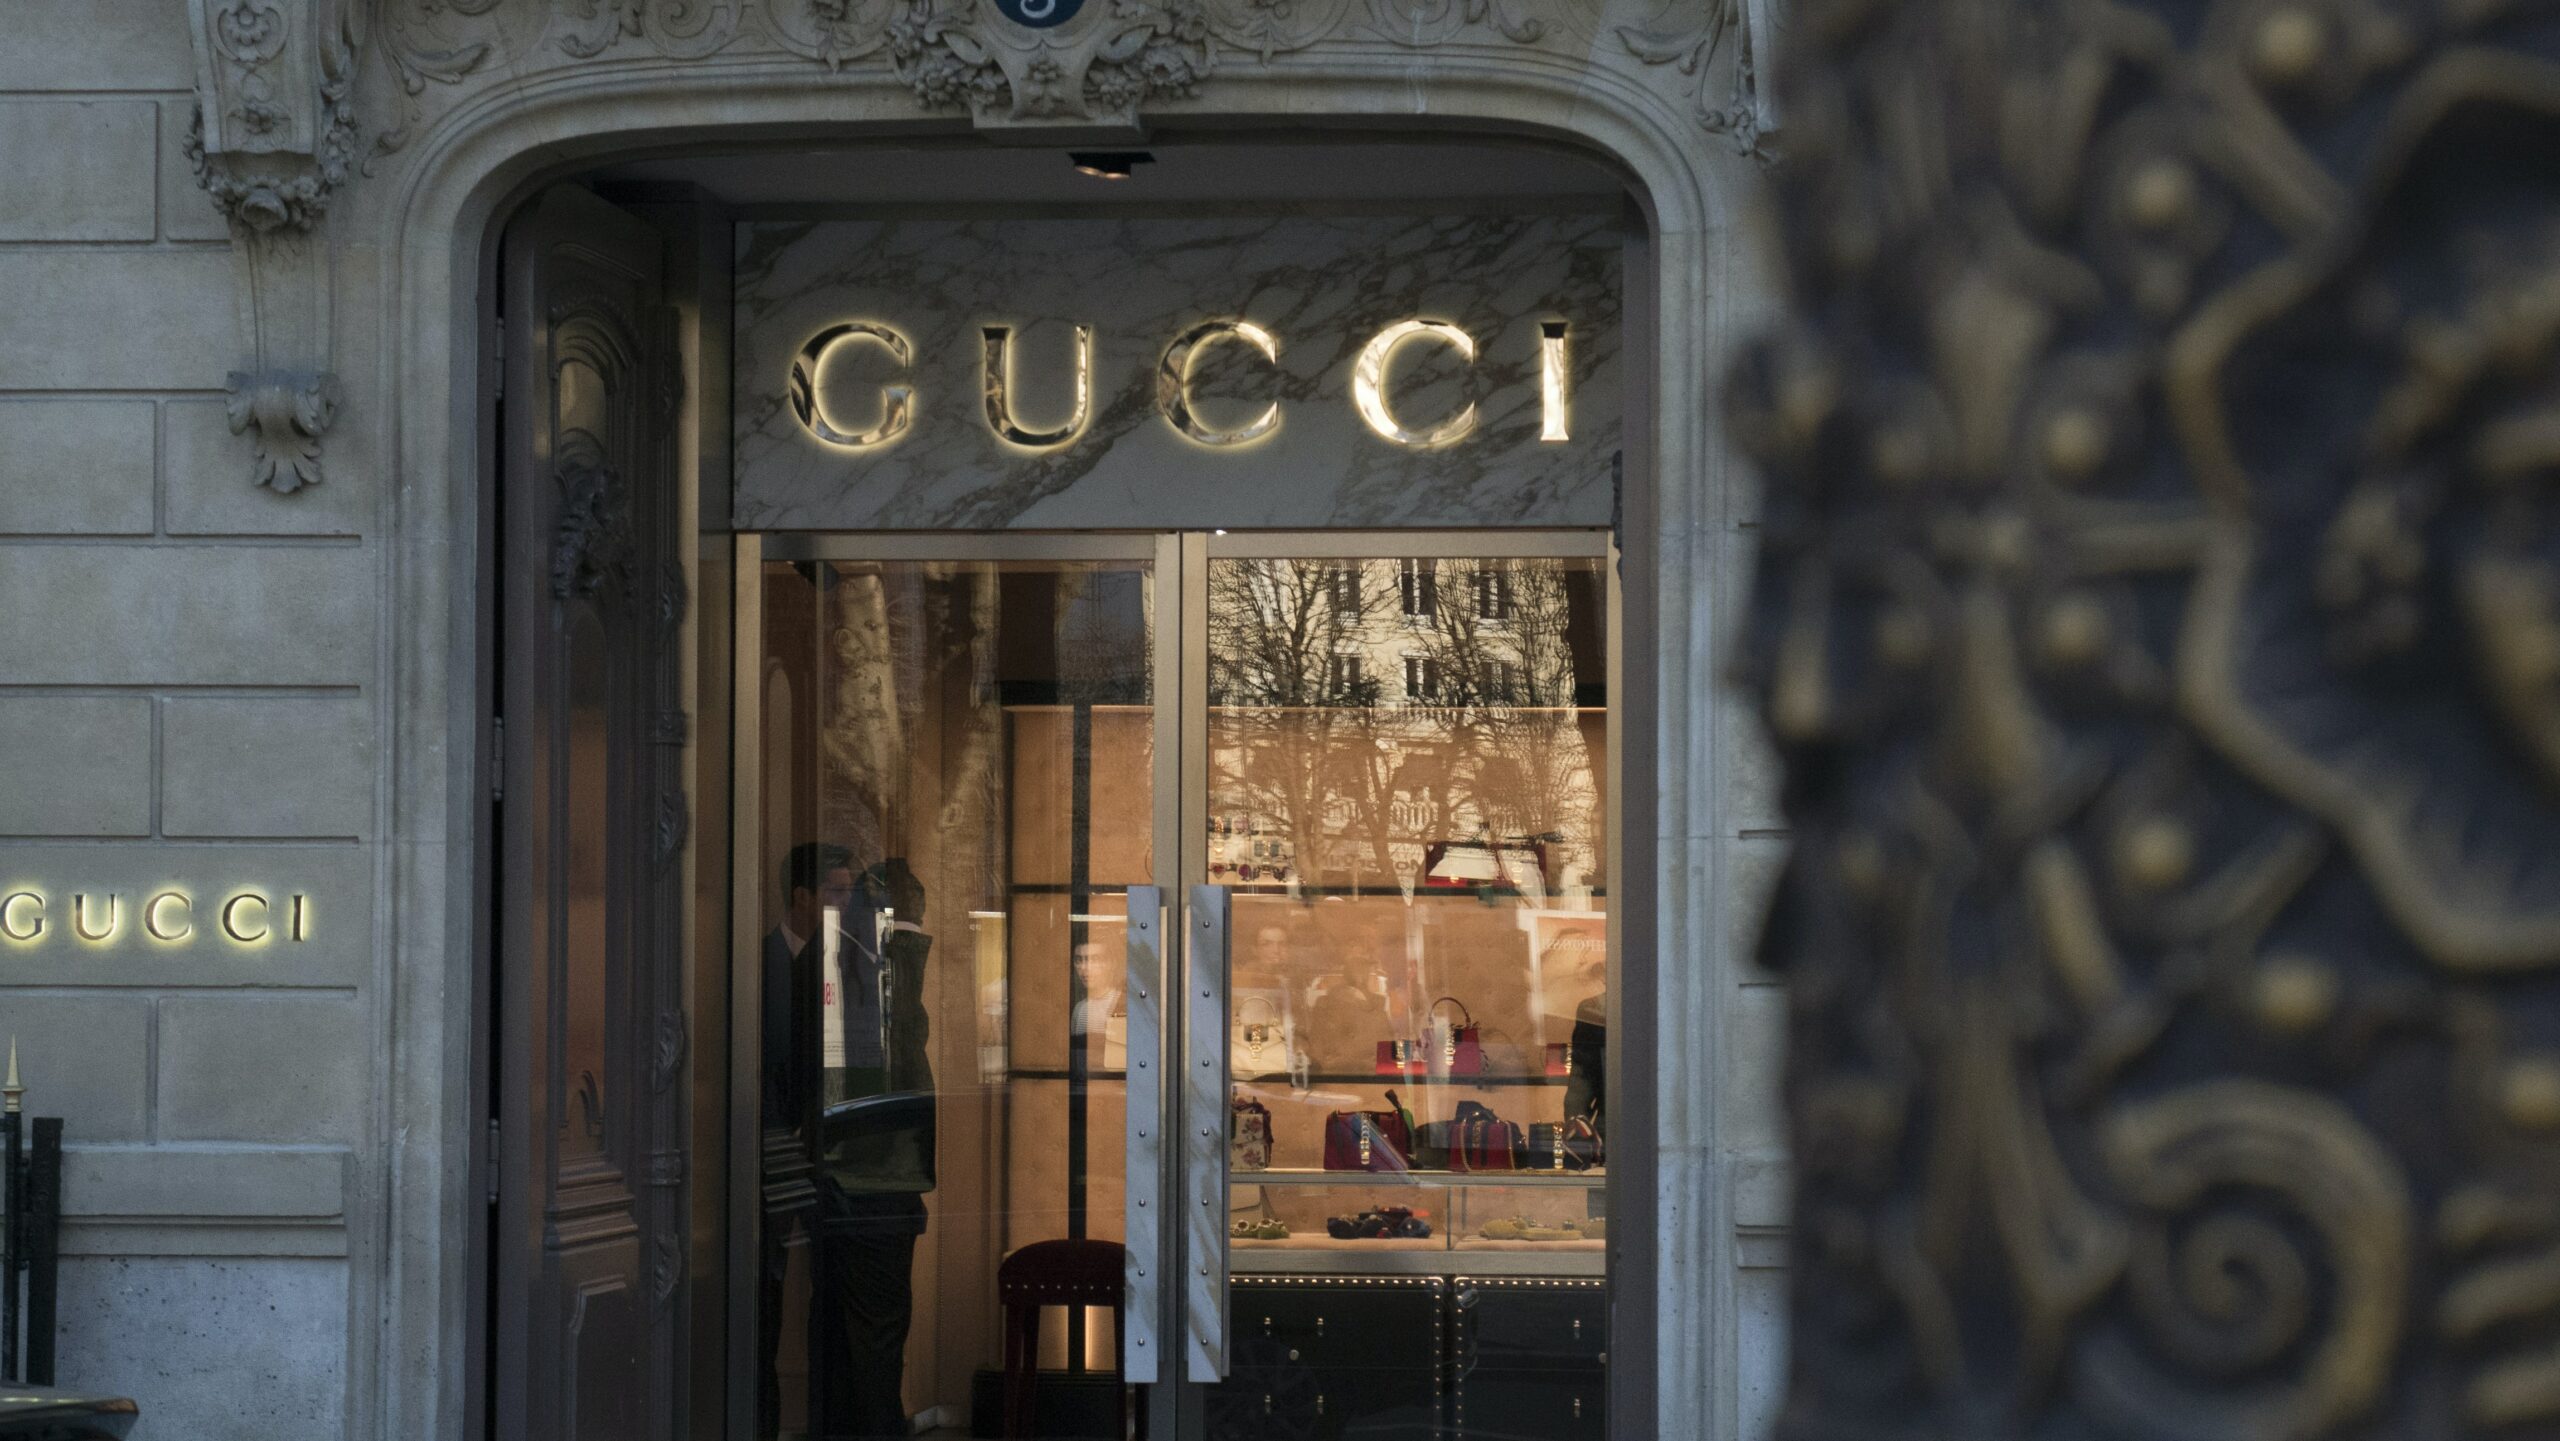 We've heard about the Balenciaga scandal, but what about Gucci?